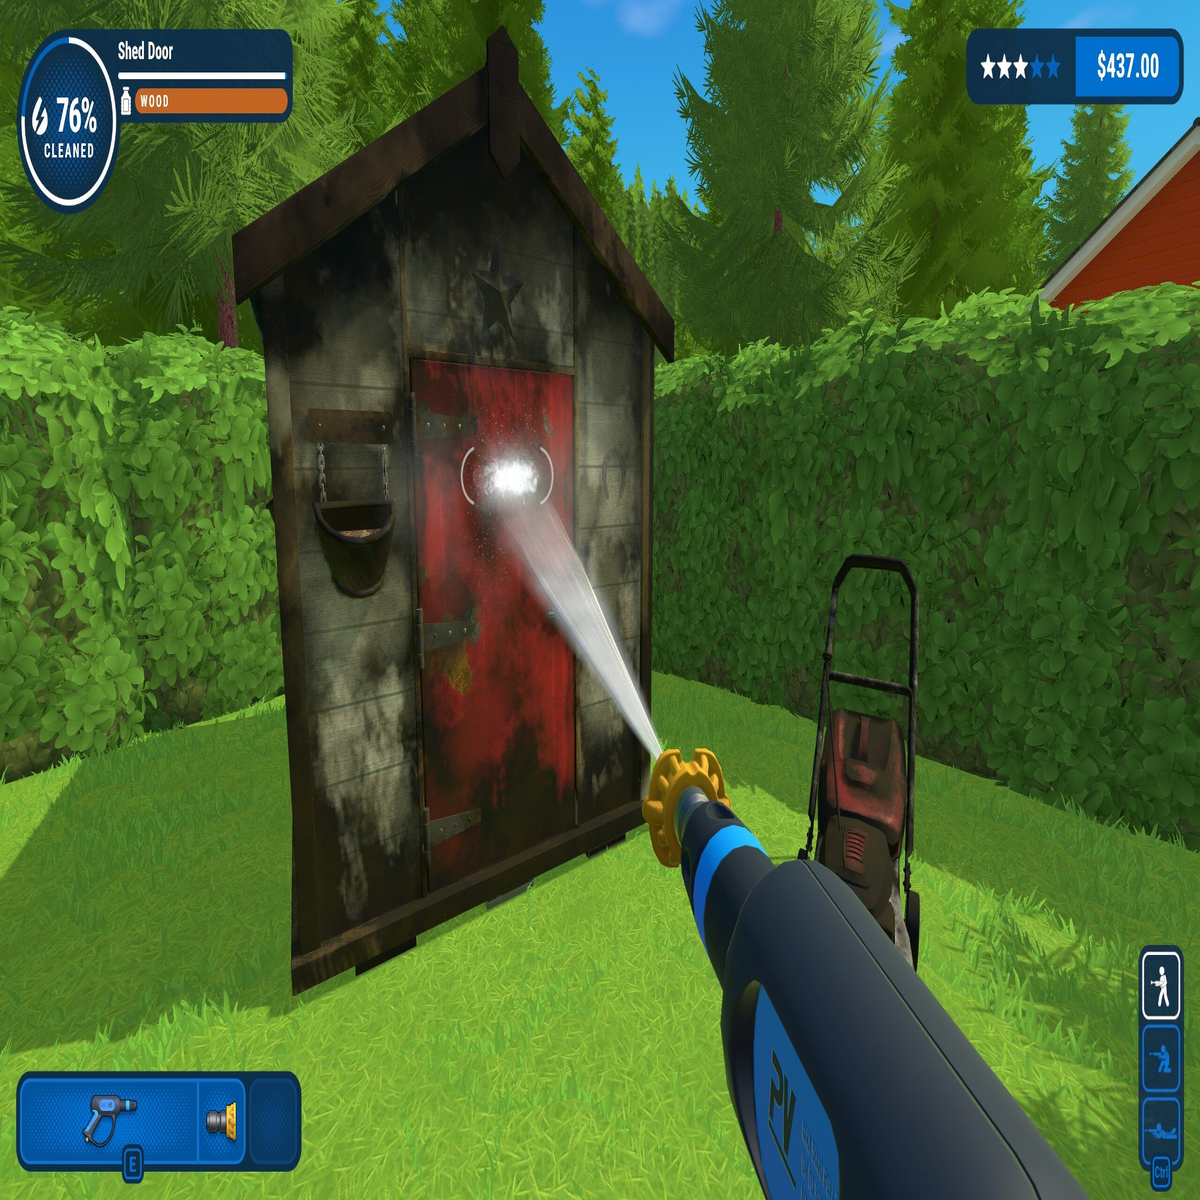 About: Power Wash Simulator (Google Play version)